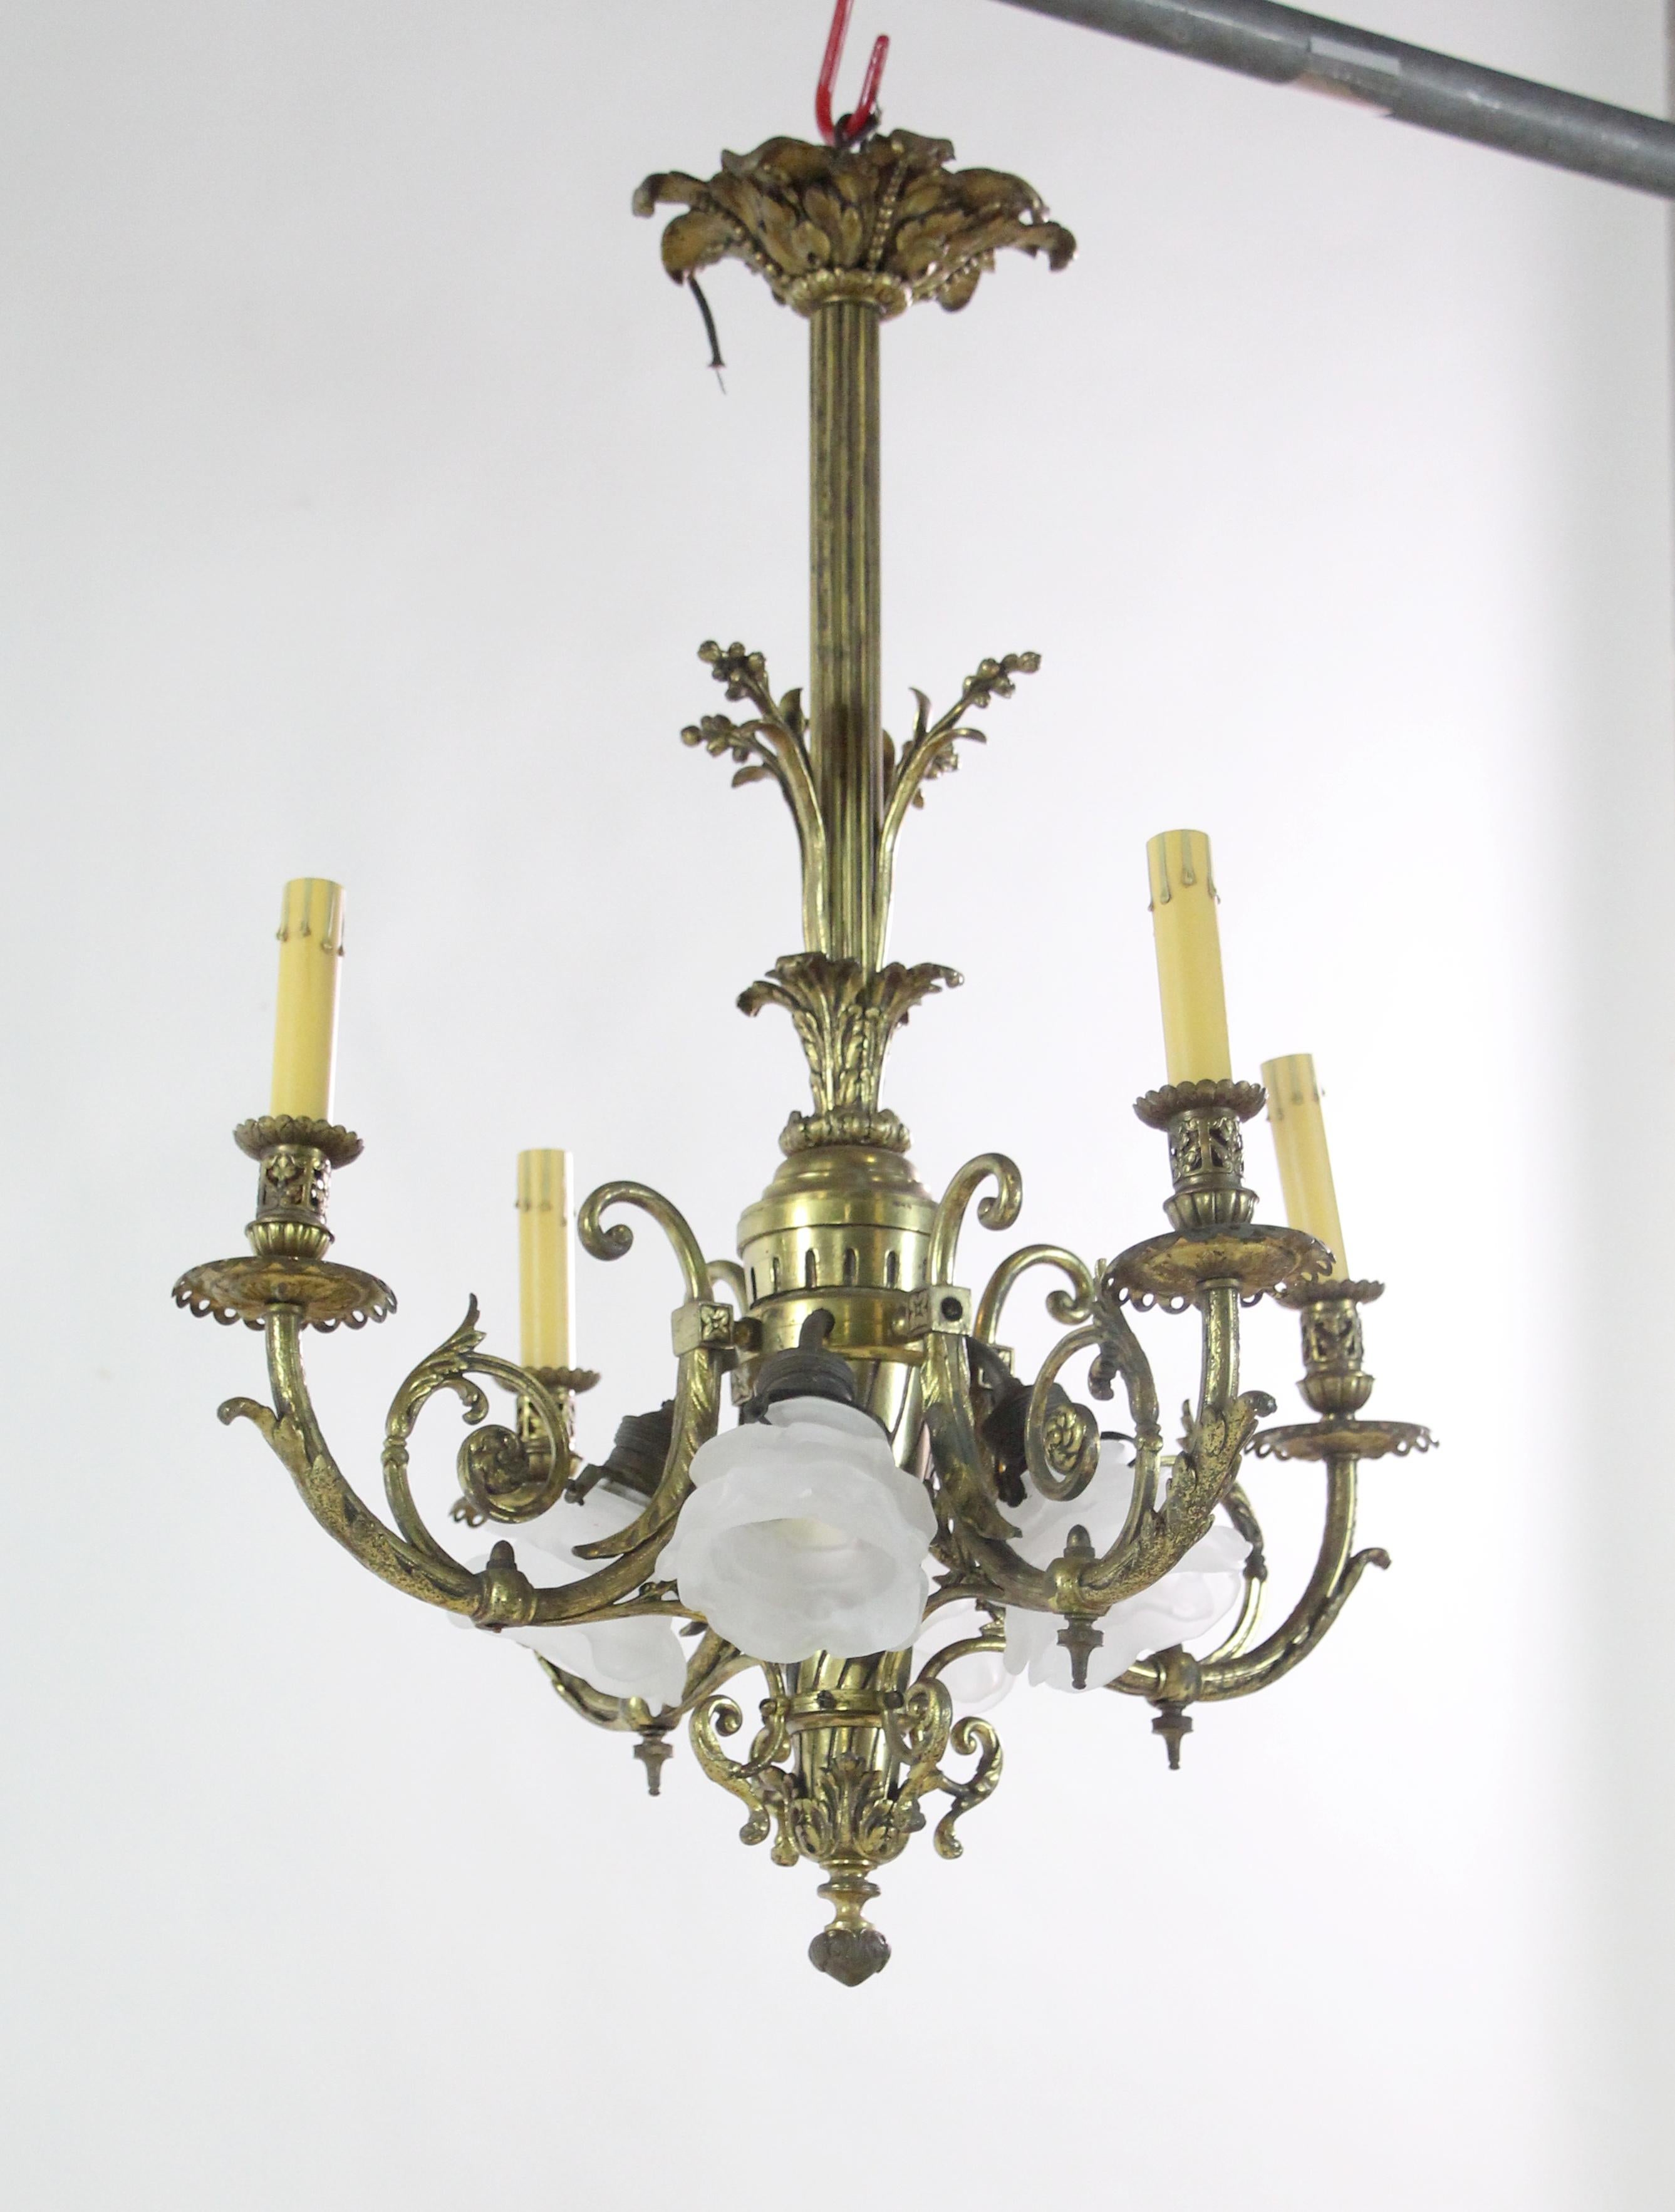 Victorian 1800s French Bronze Foliate Candlestick Chandelier w/ Four Floral Down Lights